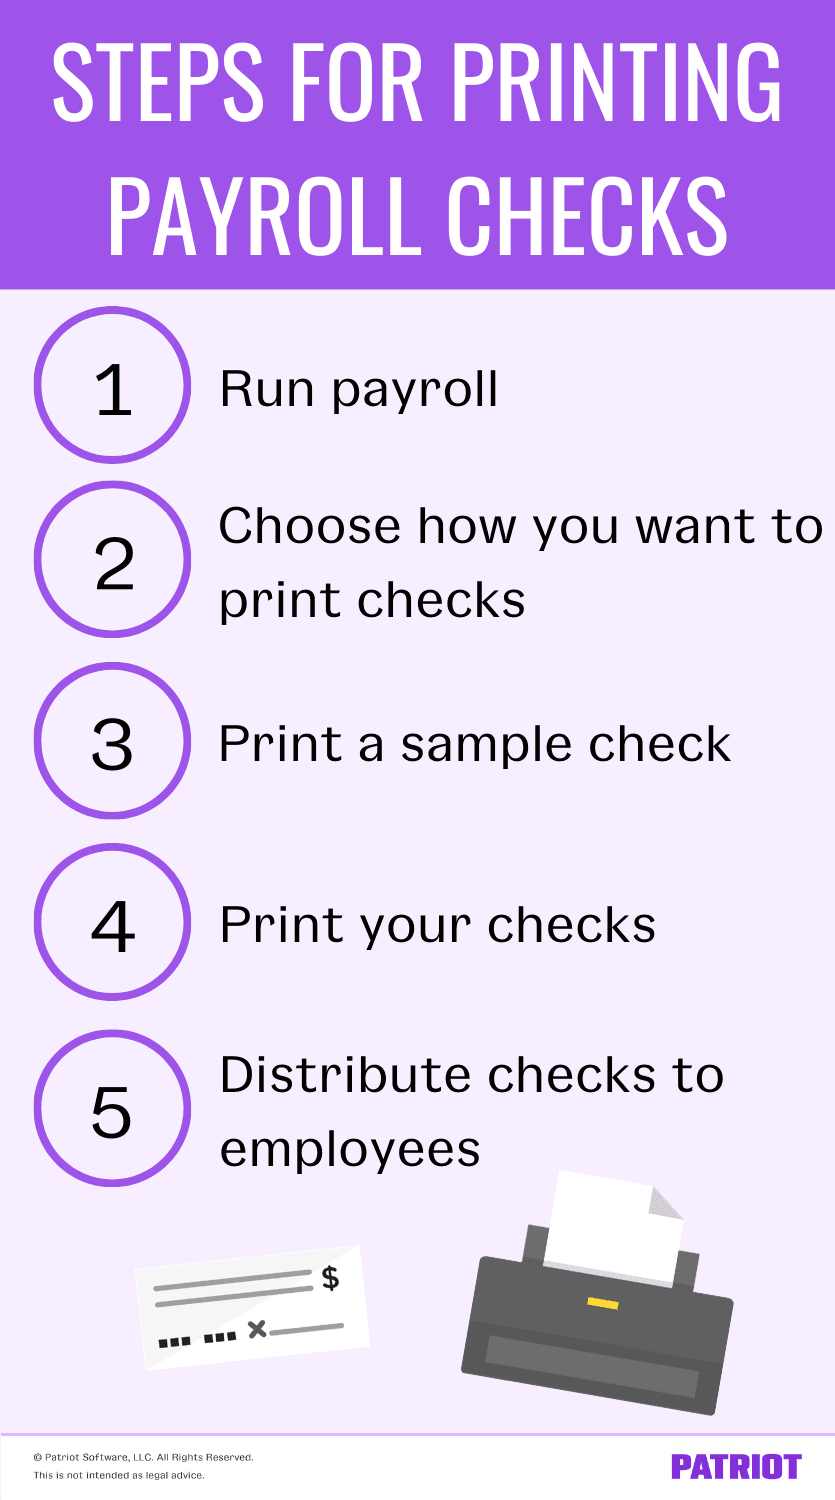 steps for printing payroll checks in software